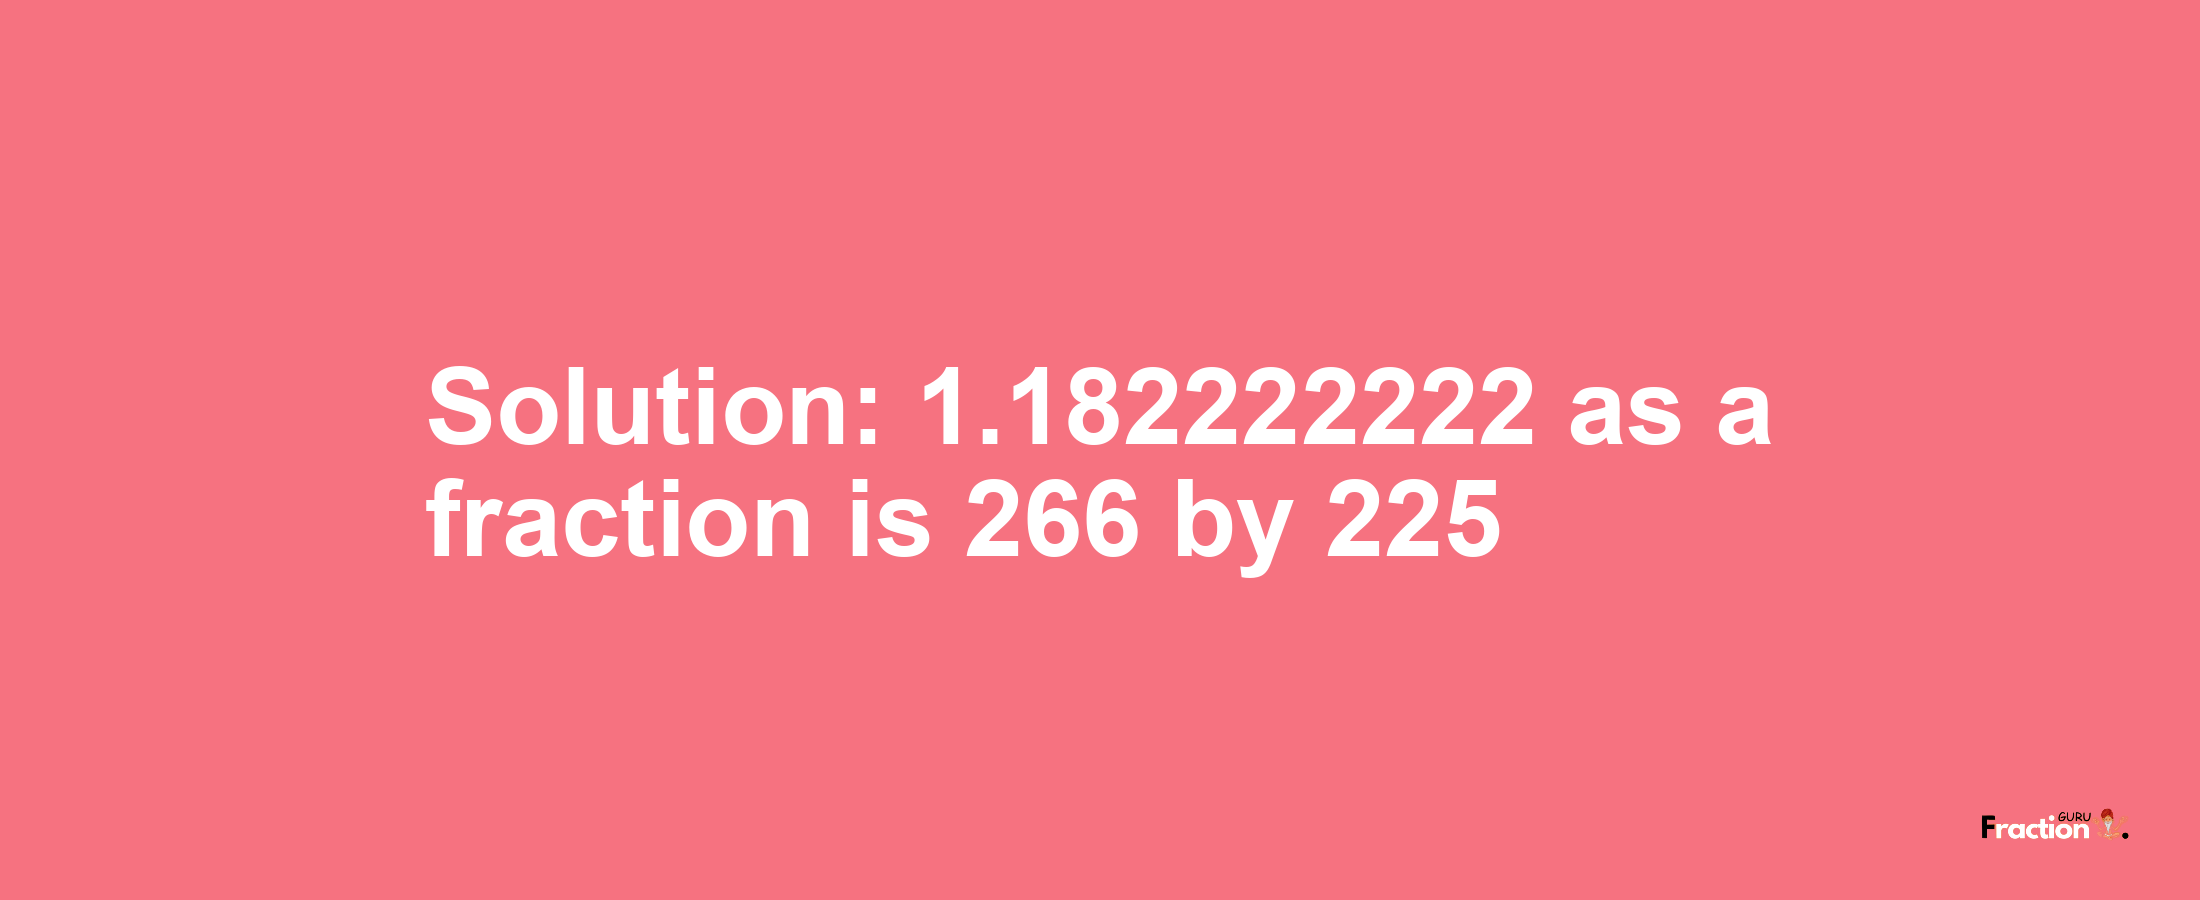 Solution:1.182222222 as a fraction is 266/225